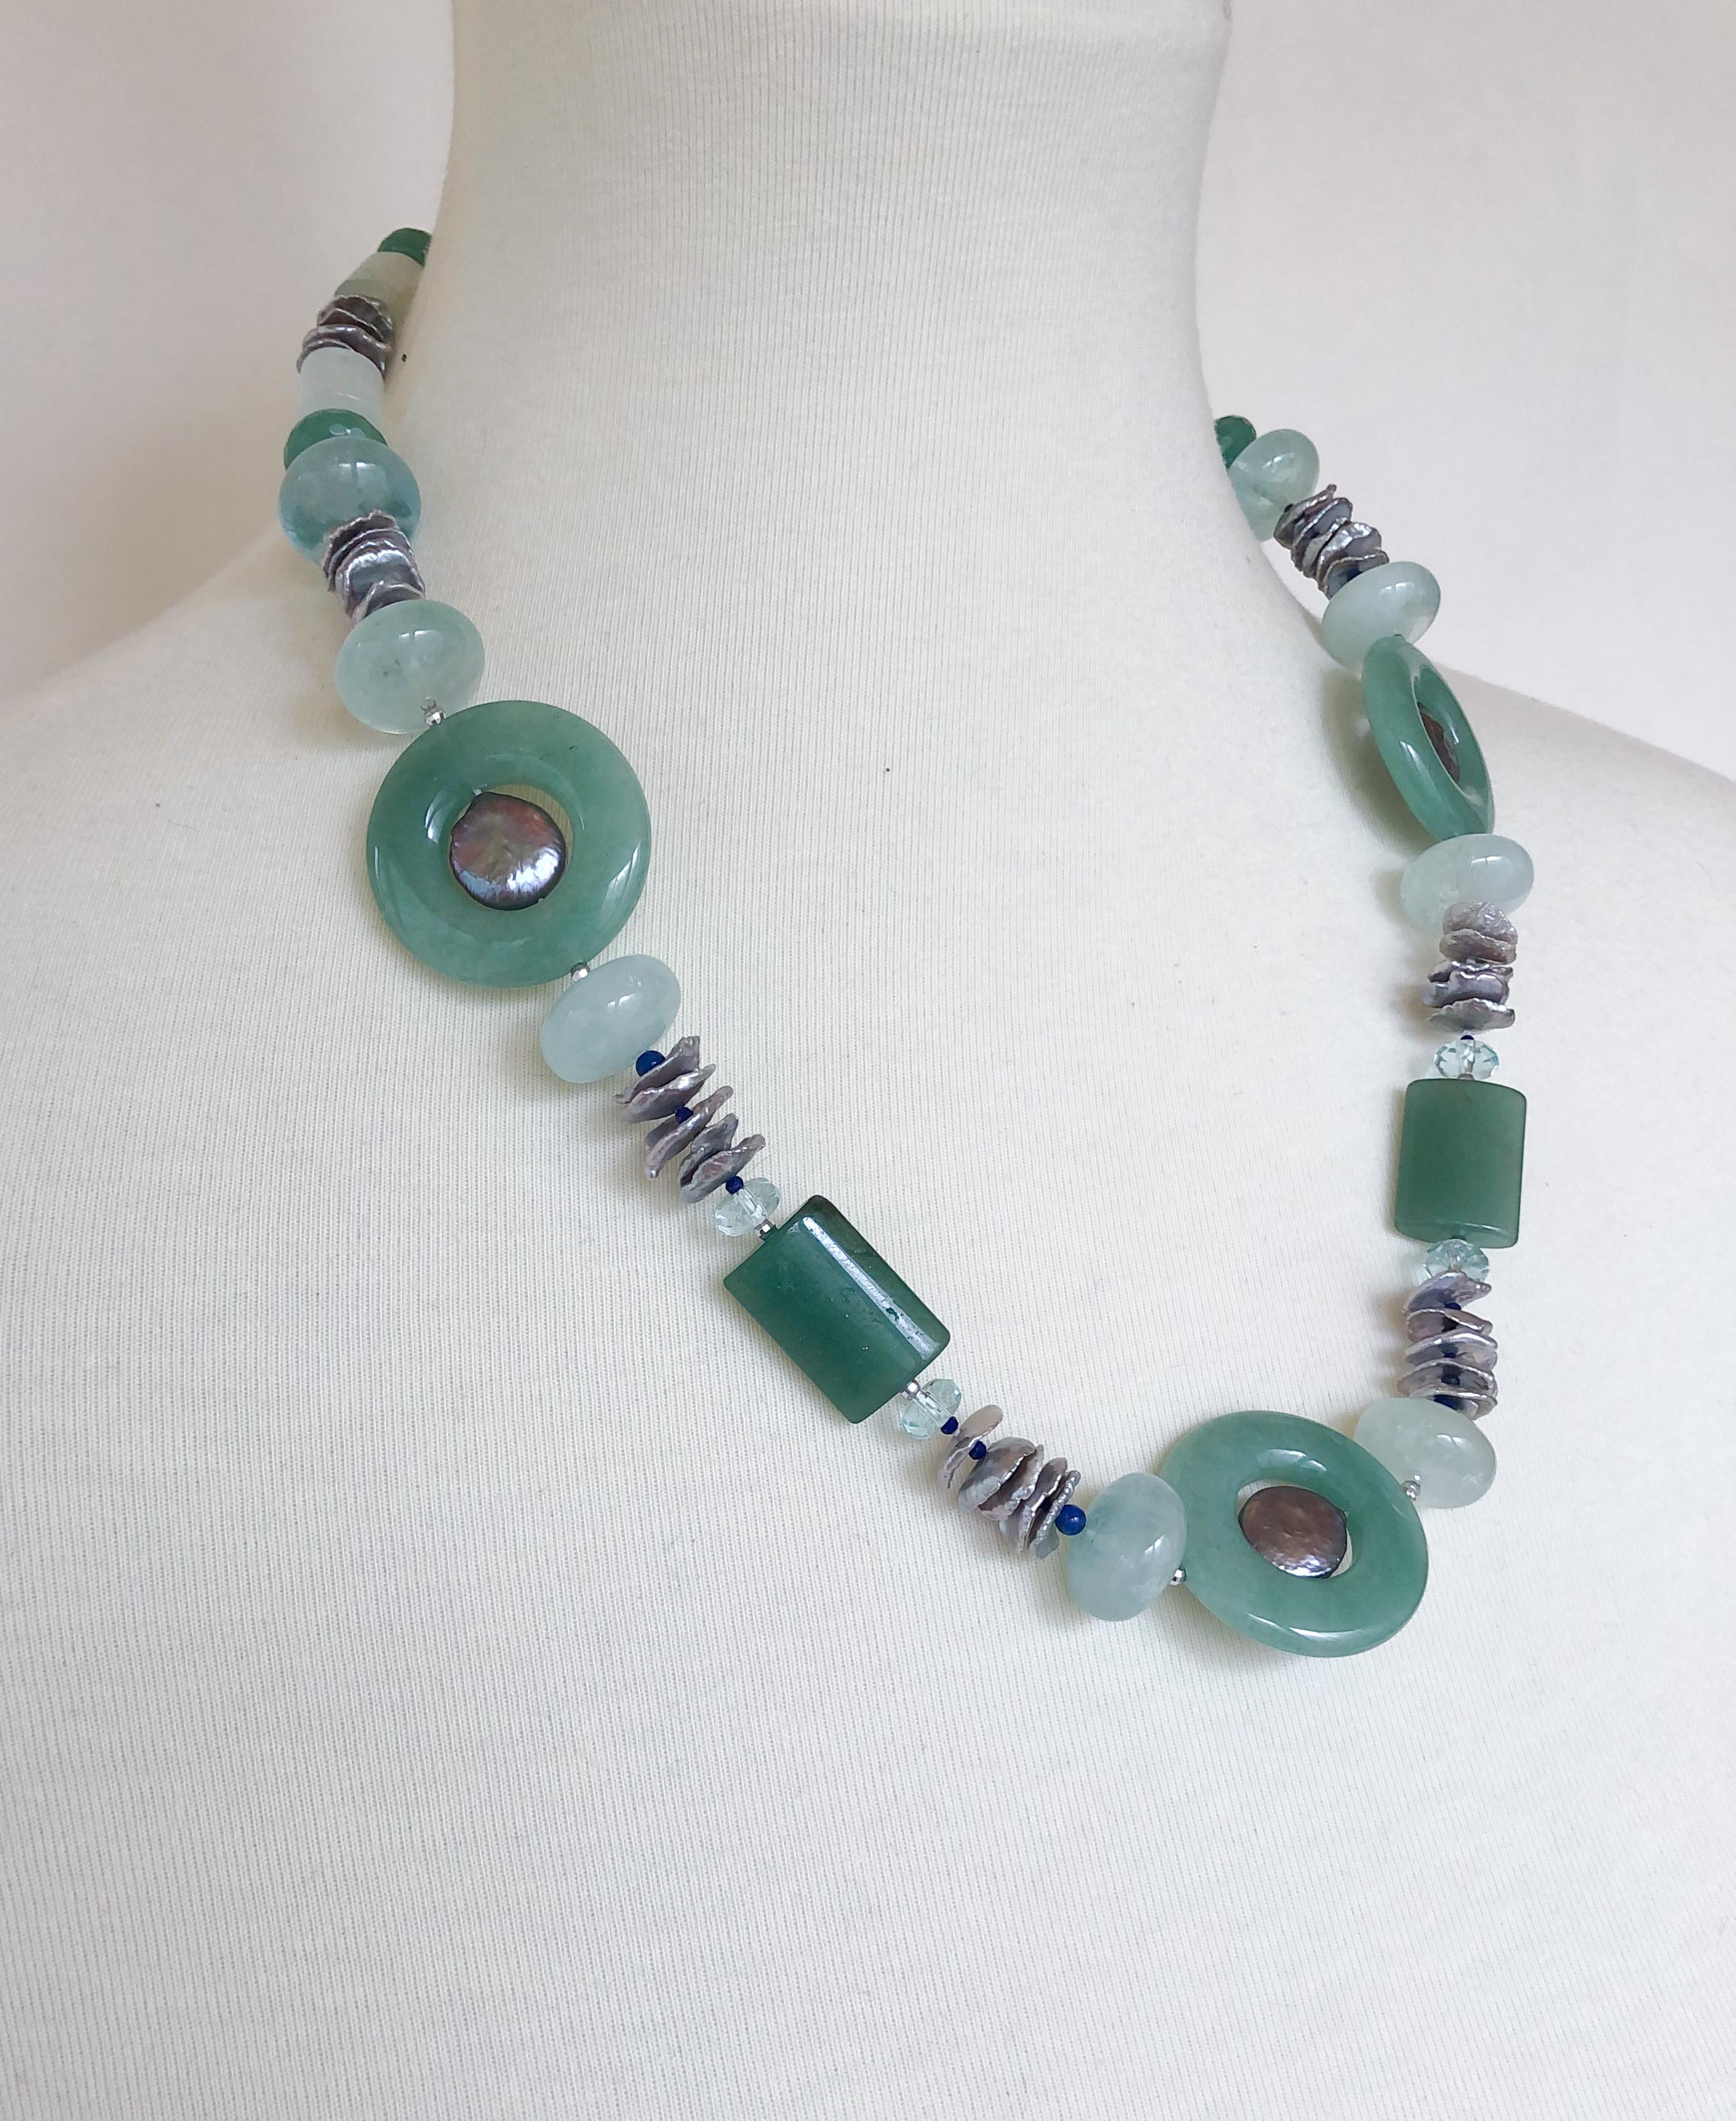 Amazing stone necklace by Marina J. This lovely piece is made using multi shaped Jade, Aquamarine, Lapis, Aventurine and magnificent Freshwater Grey Pearls which display a wonderful iridescent sheen. Small Lapis beads and Faceted Aquamarine adorn